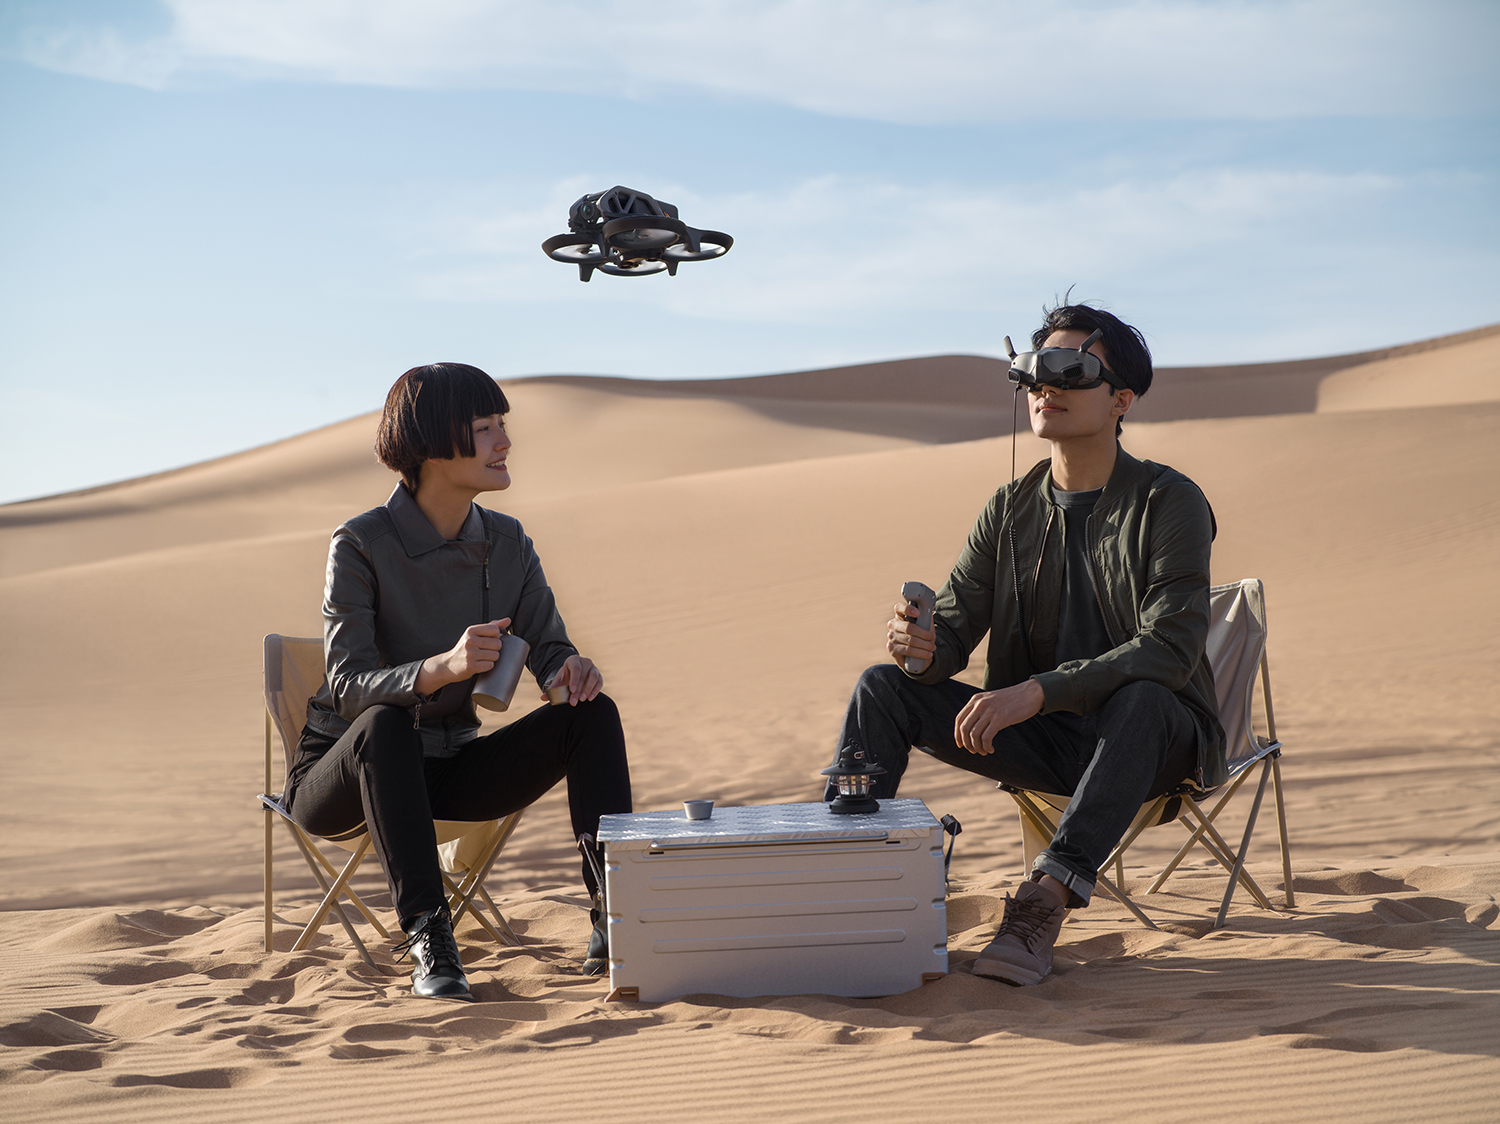 Image of two people use DJI Avata FPV Drone in desert